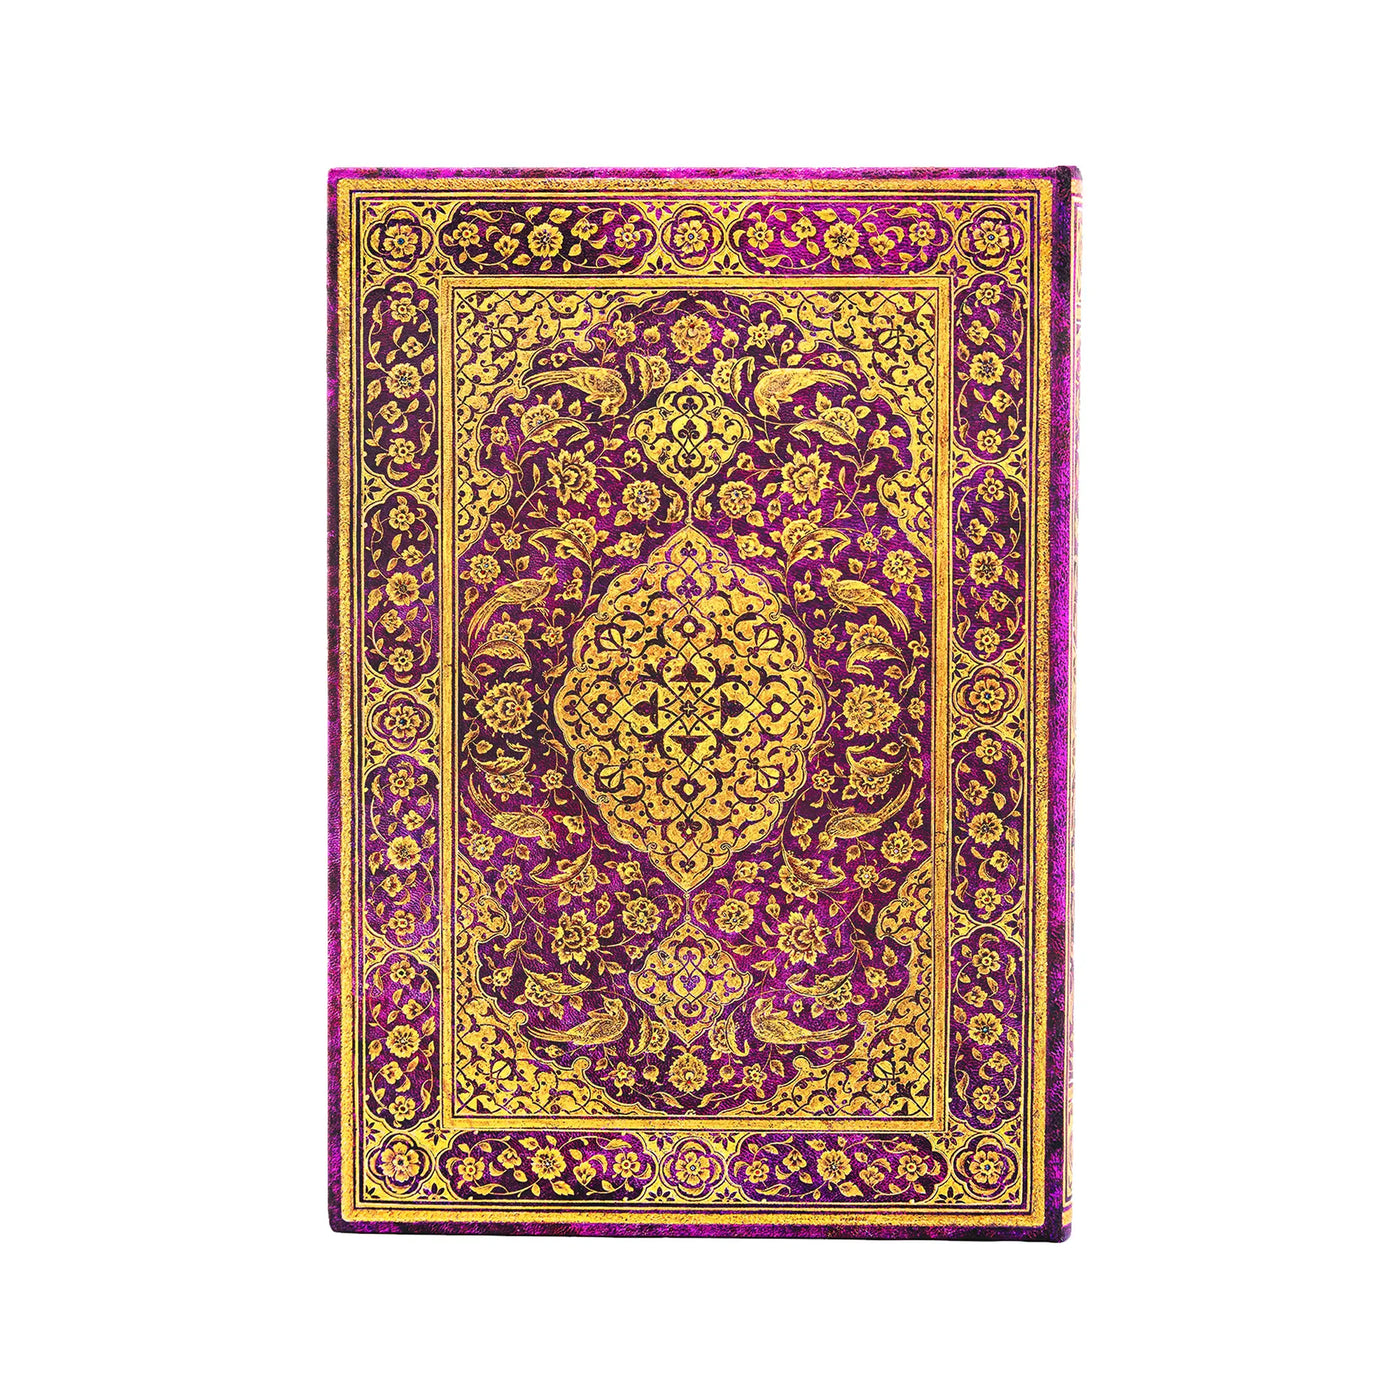 Paperblanks Persian Poetry, The Orchard Midi 5x7 Inch Journal